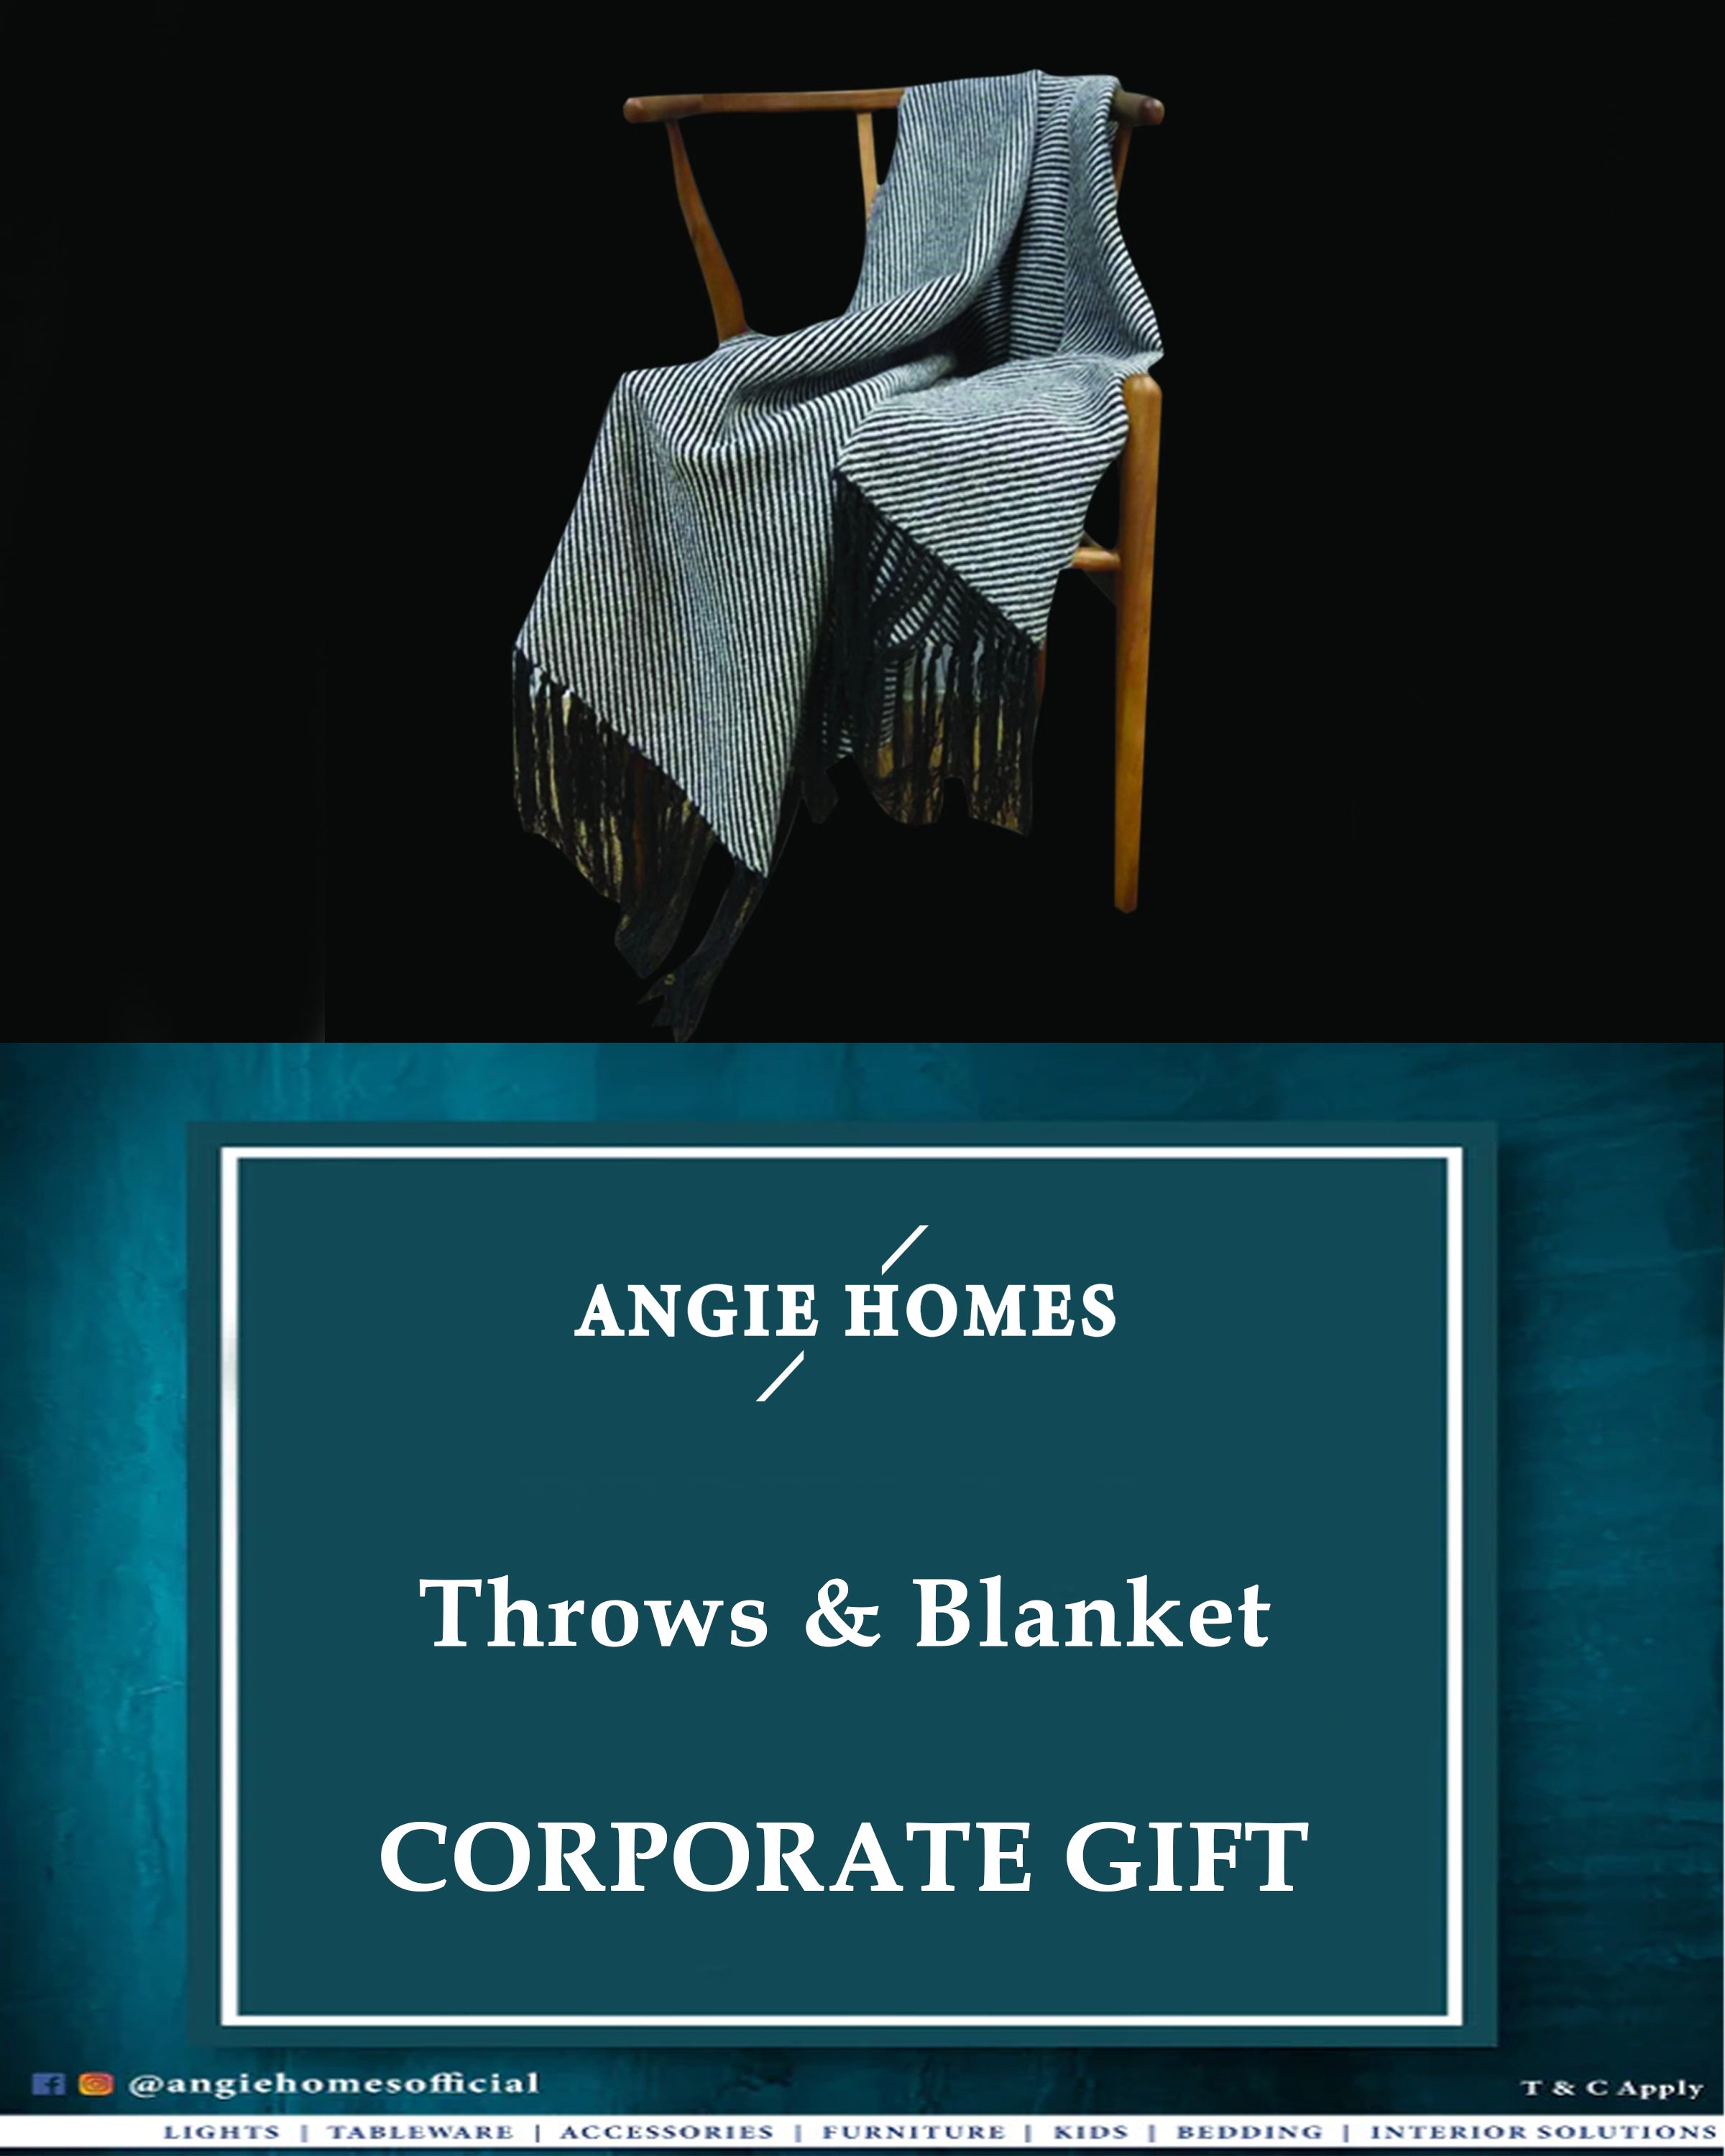 Blanket & Throws for Wedding, House Warming & Corporate Gift ANGIE HOMES